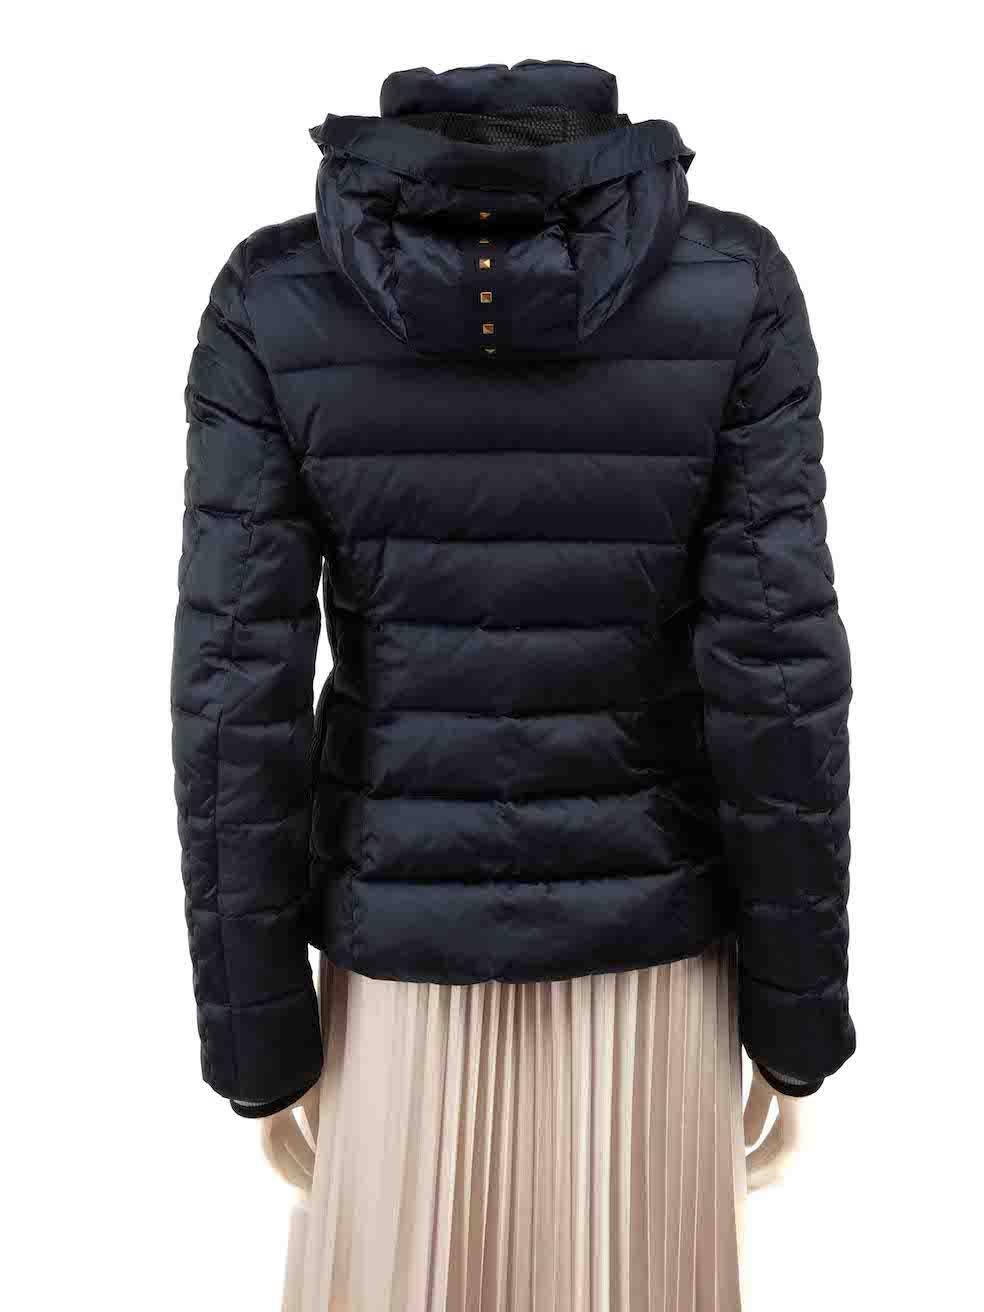 Bogner Navy Padded Puffer Jacket Size S In Good Condition For Sale In London, GB